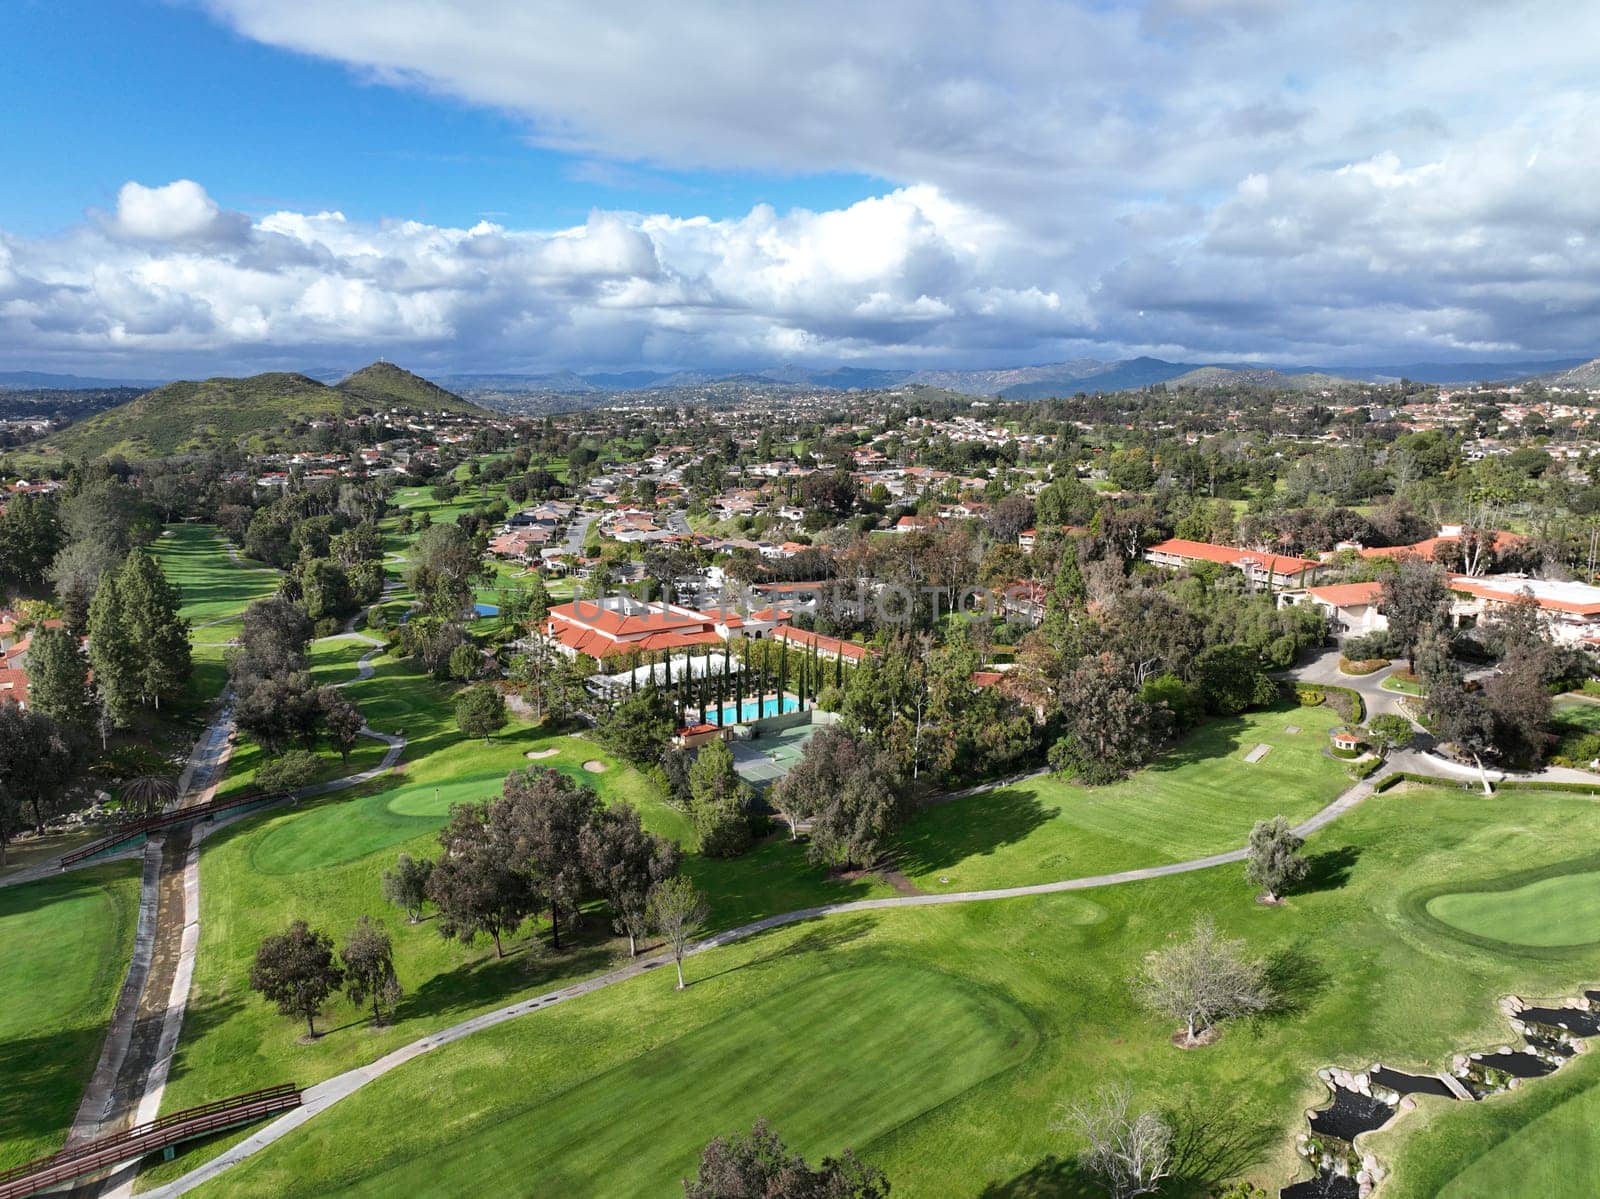 Aerial view of residential neighborhood surrounded by golf and valley during cloudy day in Rancho Bernardo by Bonandbon